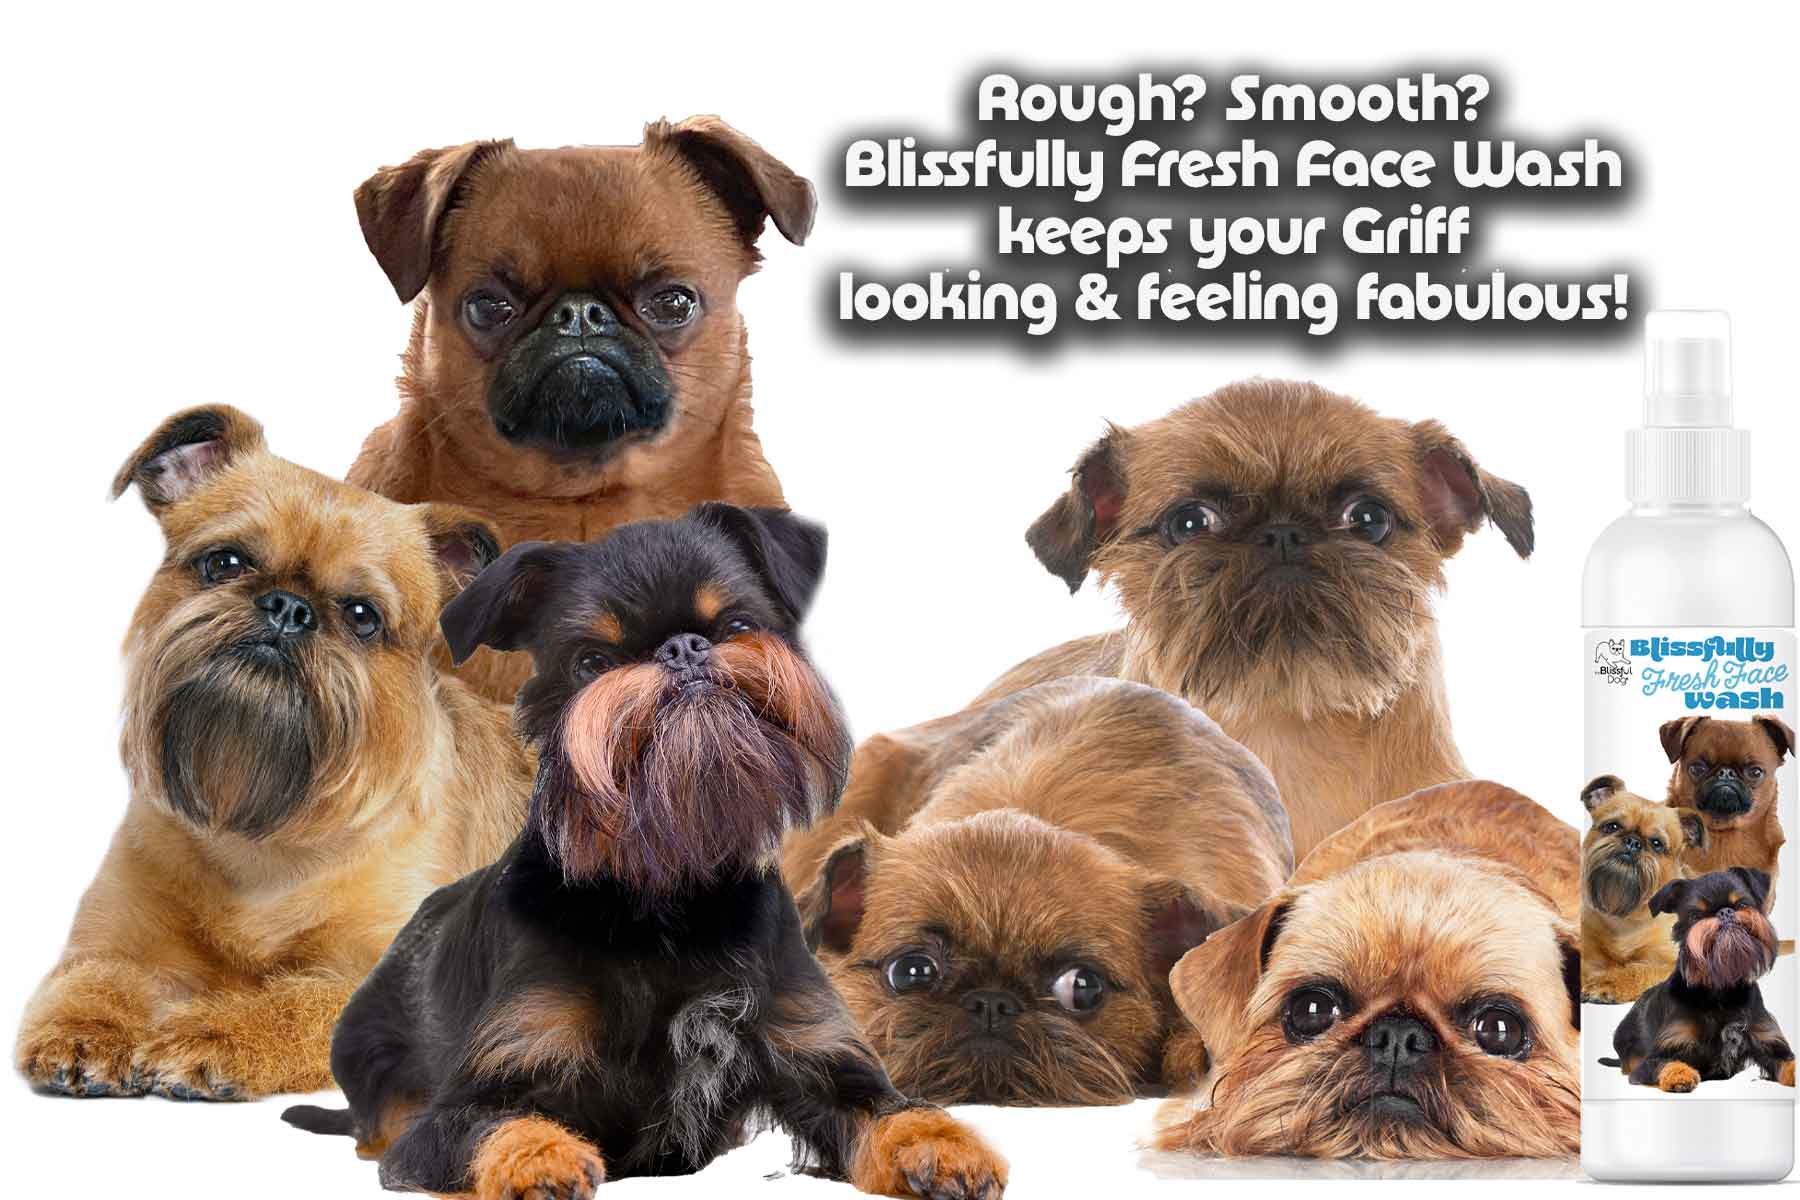 SMOOTH AND ROUGH BRUSSELS GRIFFON DOGS